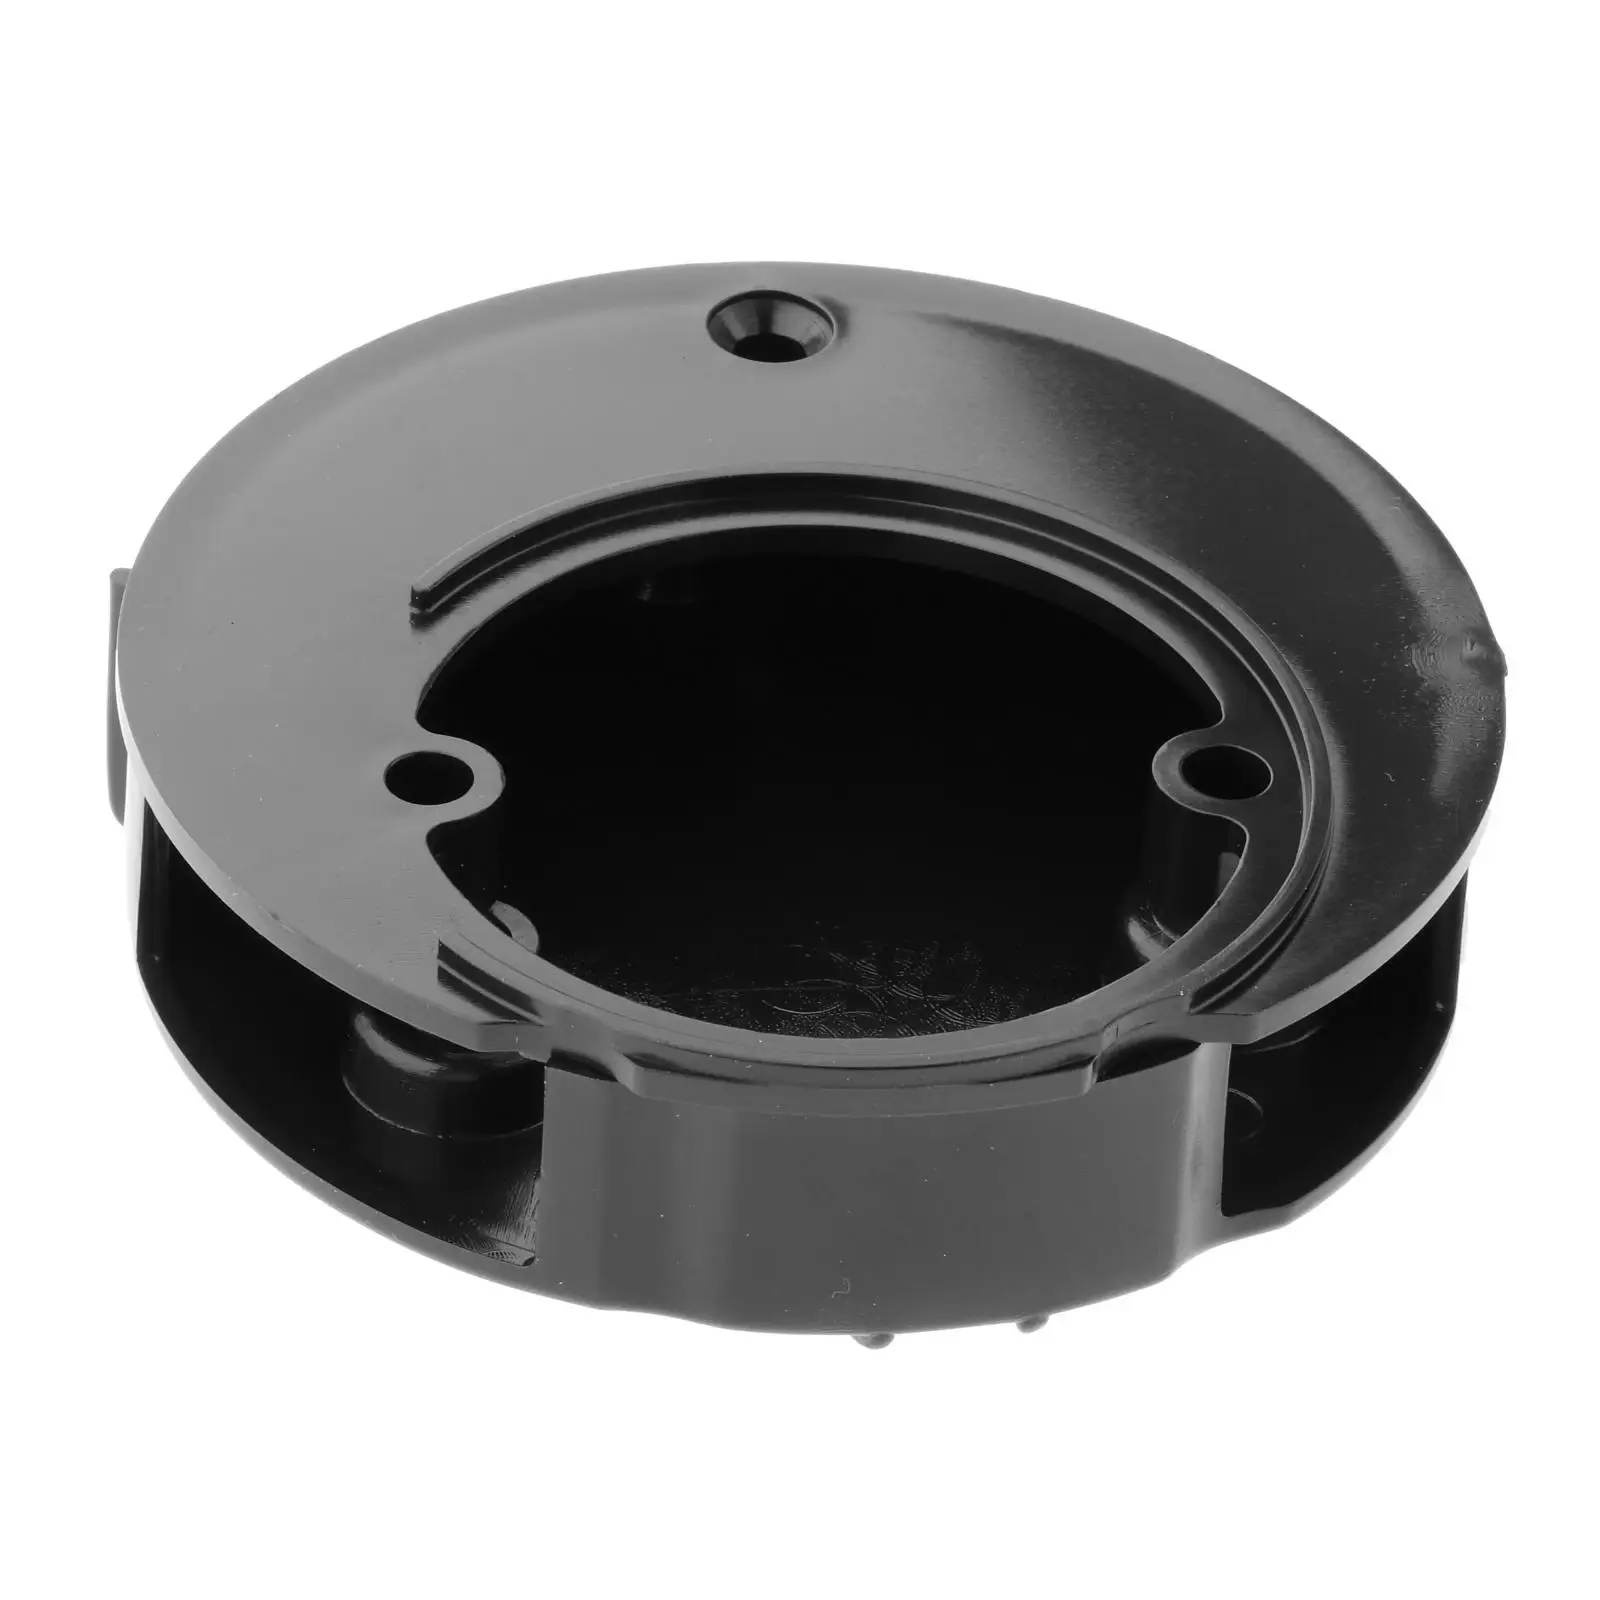 Carburetor Air Filter Cover Accessories High Strength Black Replacement for Yamaha Motor 2T 4 5HP 6E0-14417-00 6E0-14417